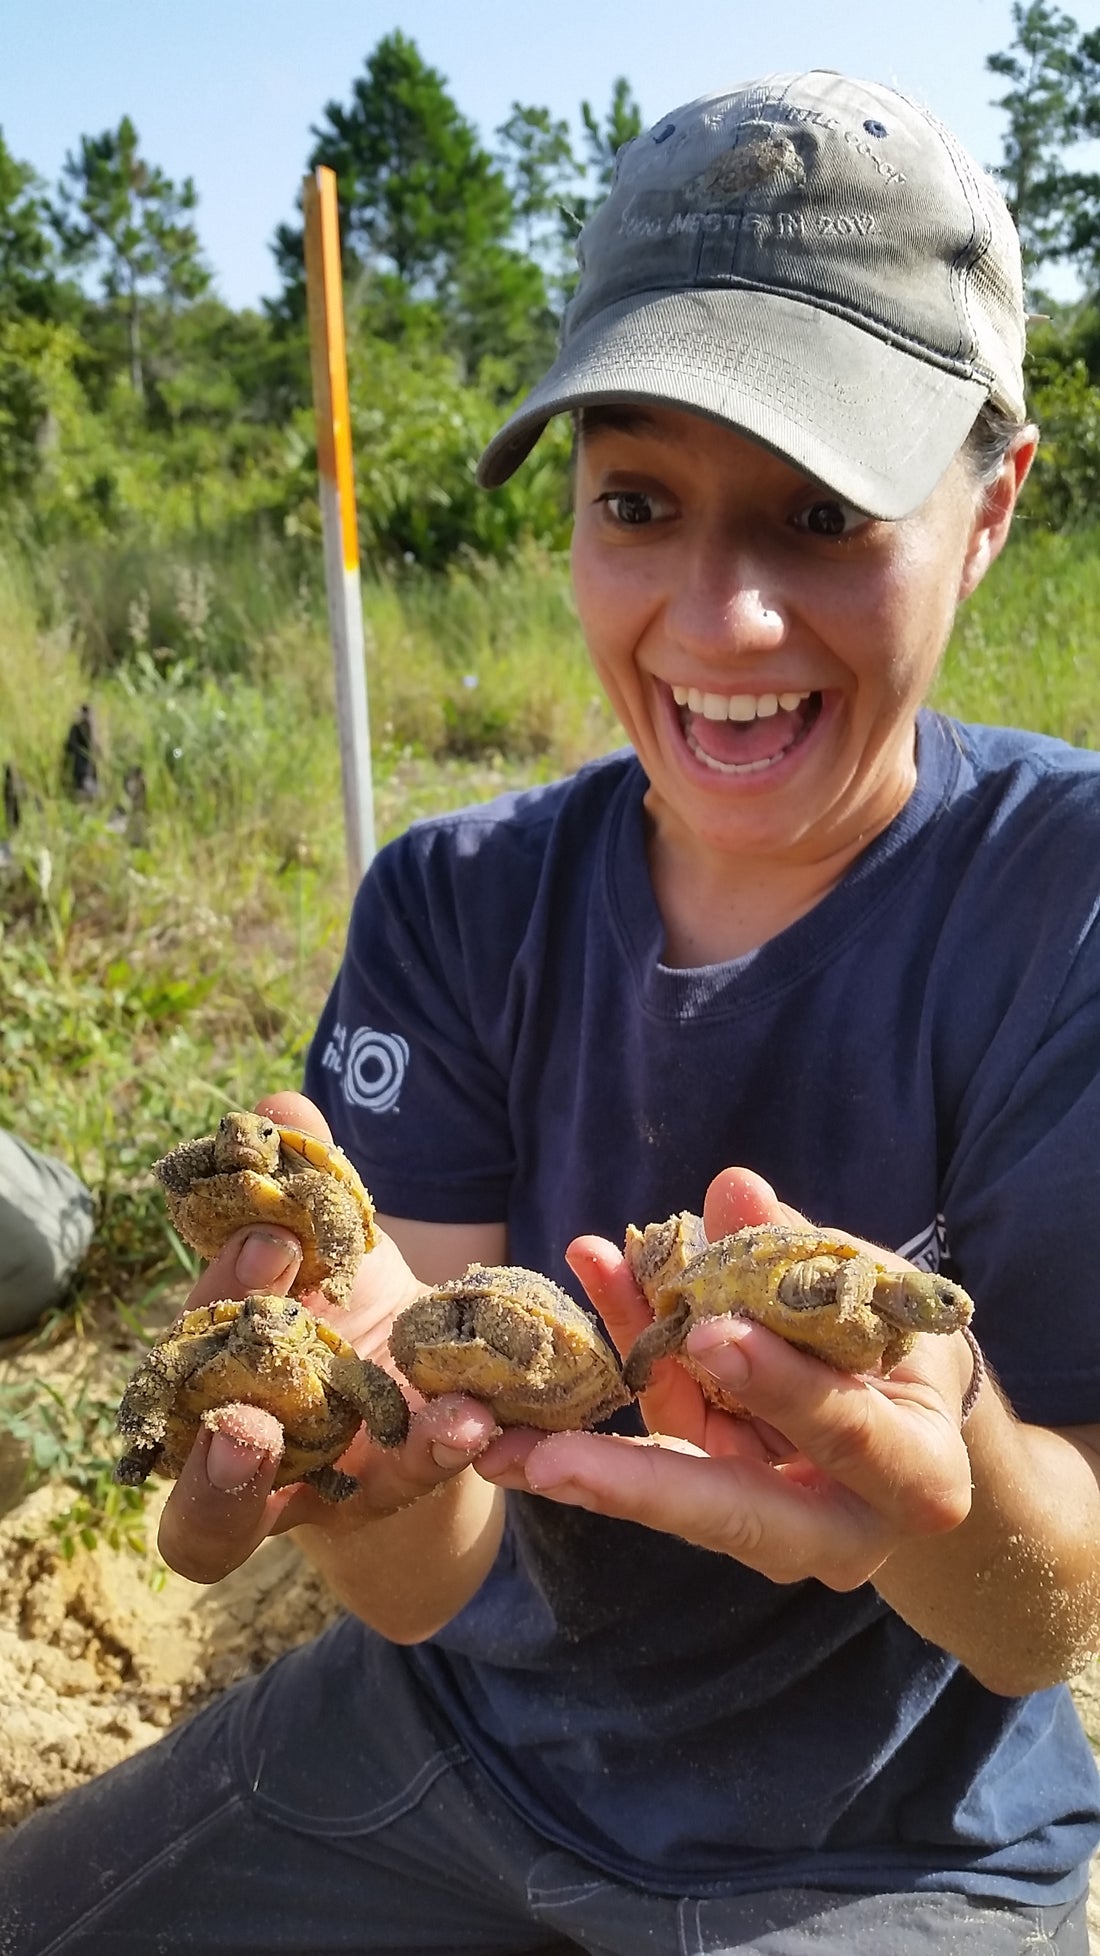 Young woman in a blue gray hat and blue shirt smiles as she looks on at baby tortoises in her hands.